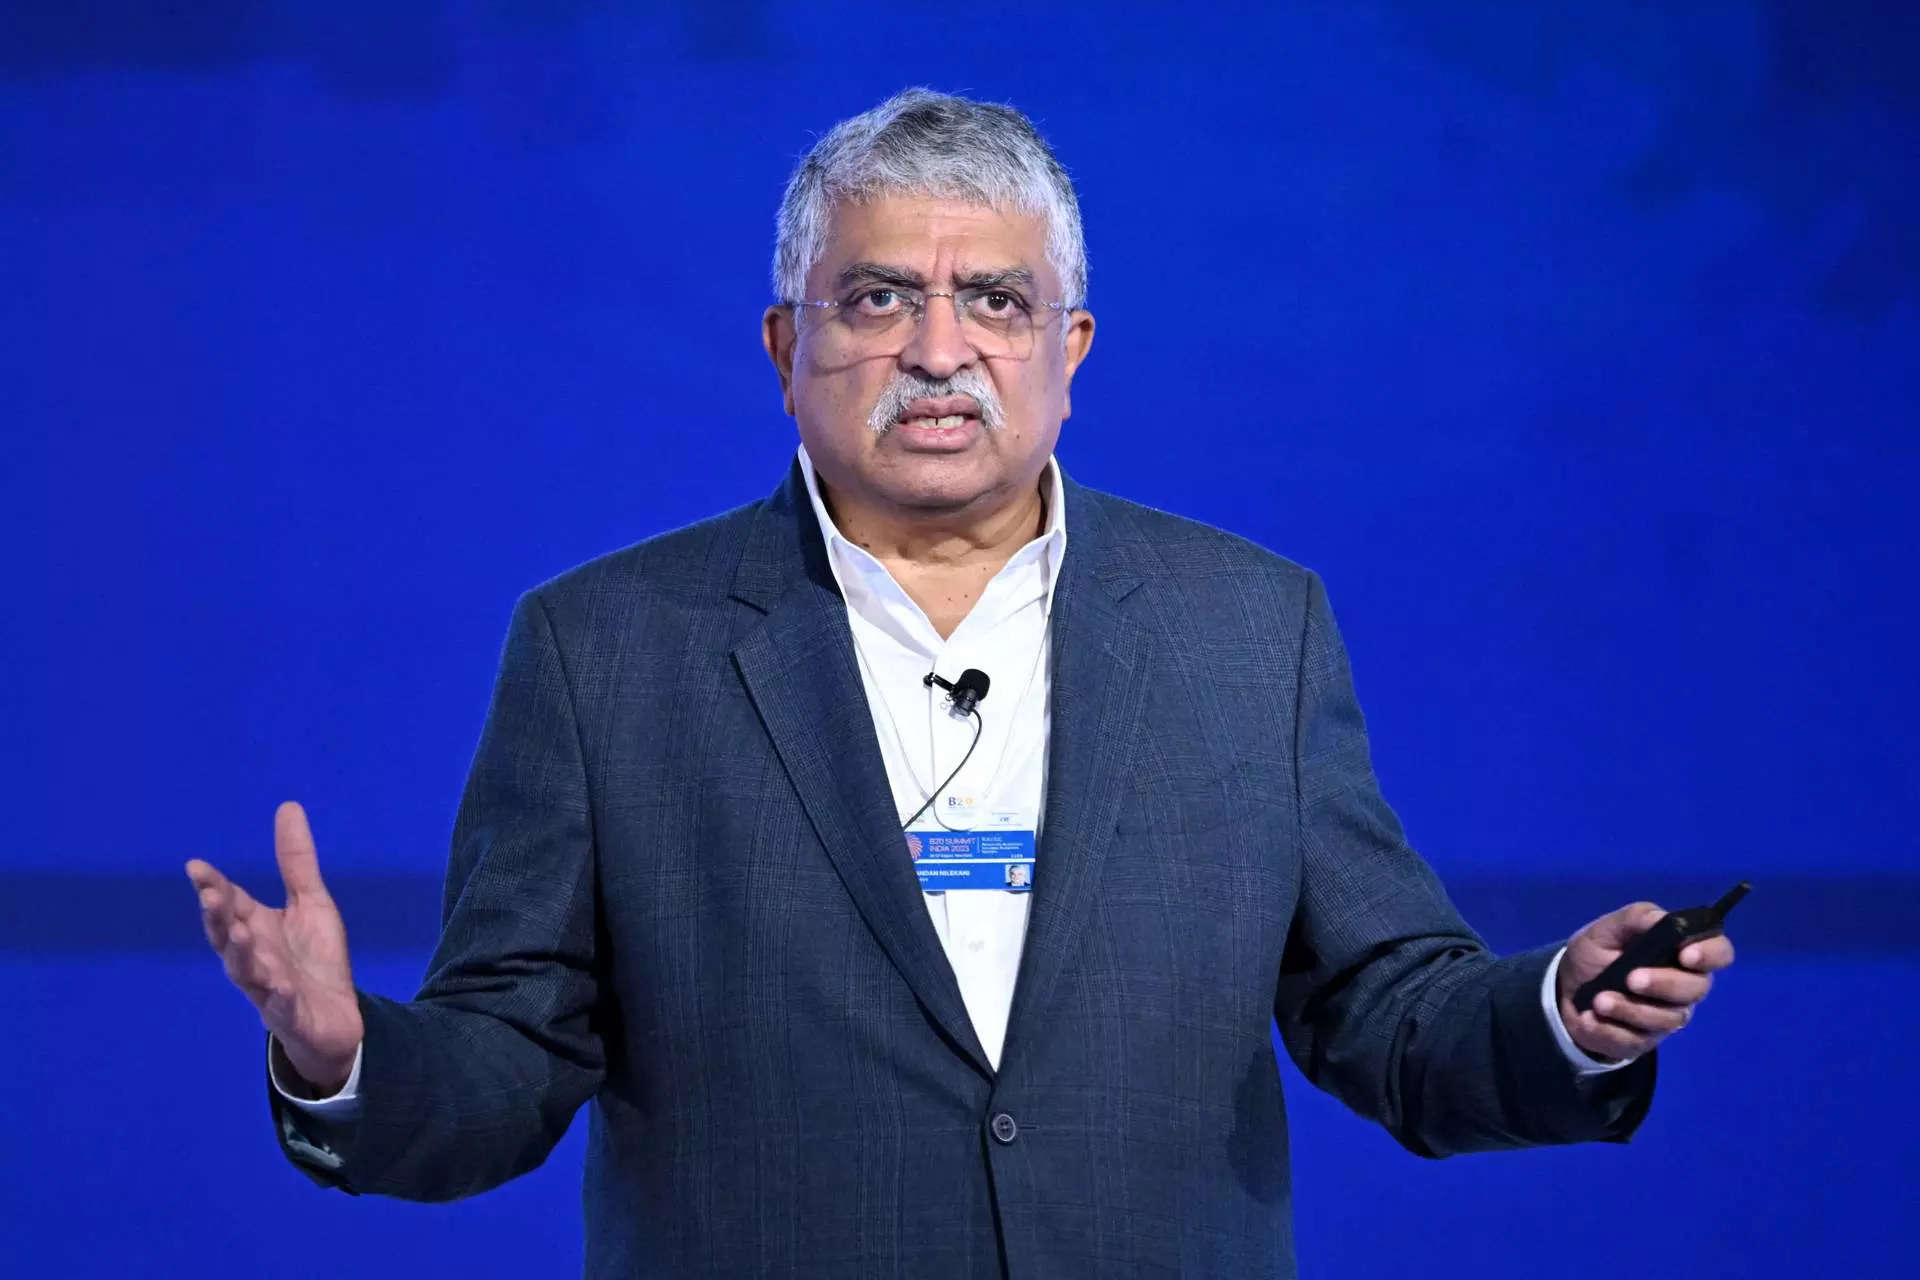 Nandan Nilekani, Chairman and Co-Founder of Infosys and Founding Chairman of UIDAI (Aadhaar), addresses the gathering on the third day of the three-day B20 Summit in New Delhi on August 27, 2023. (Photo by Sajjad HUSSAIN / AFP)